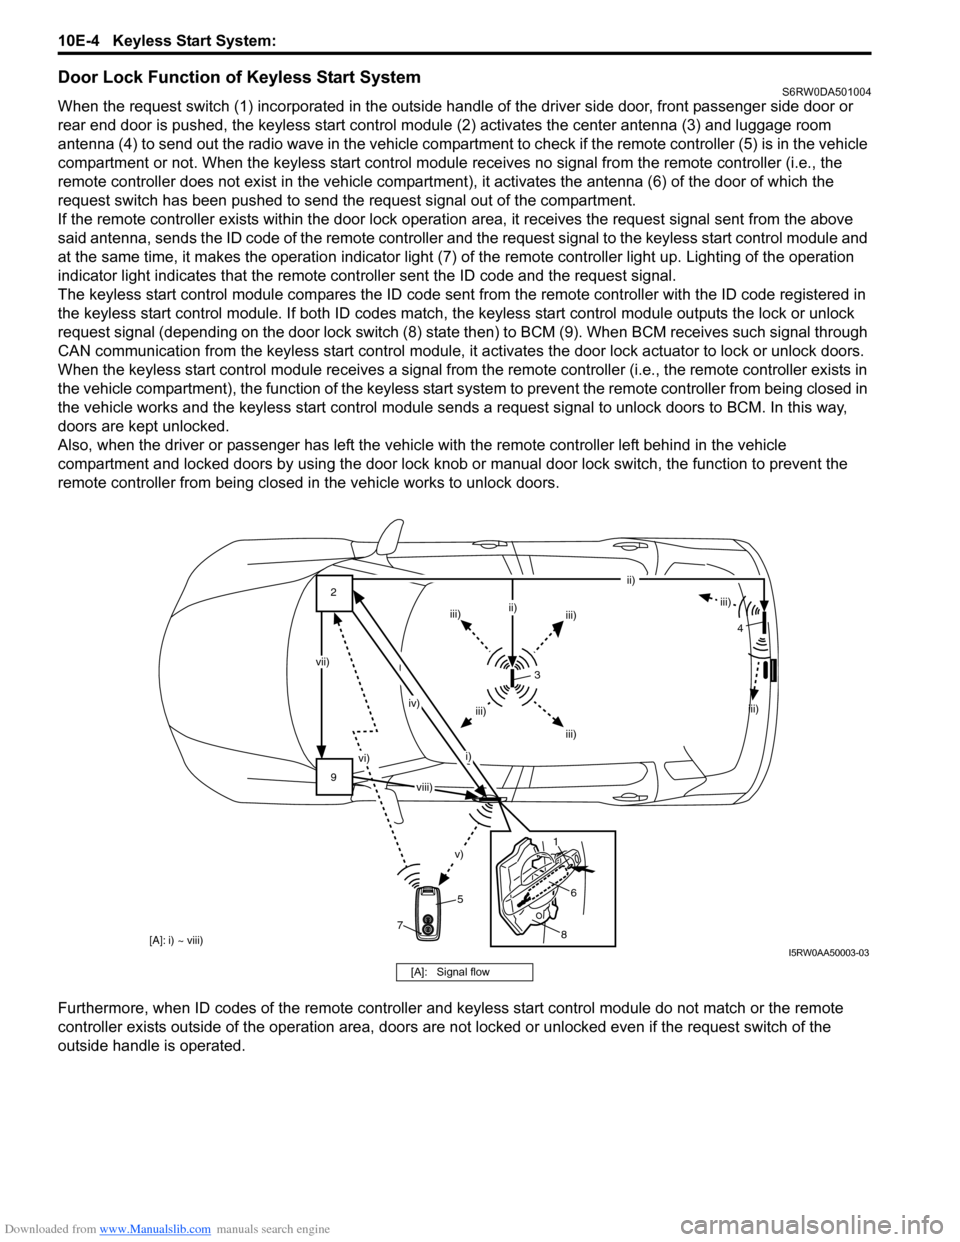 SUZUKI SX4 2006 1.G Service Workshop Manual Downloaded from www.Manualslib.com manuals search engine 10E-4 Keyless Start System: 
Door Lock Function of Keyless Start SystemS6RW0DA501004
When the request switch (1) incorporated in the outside ha